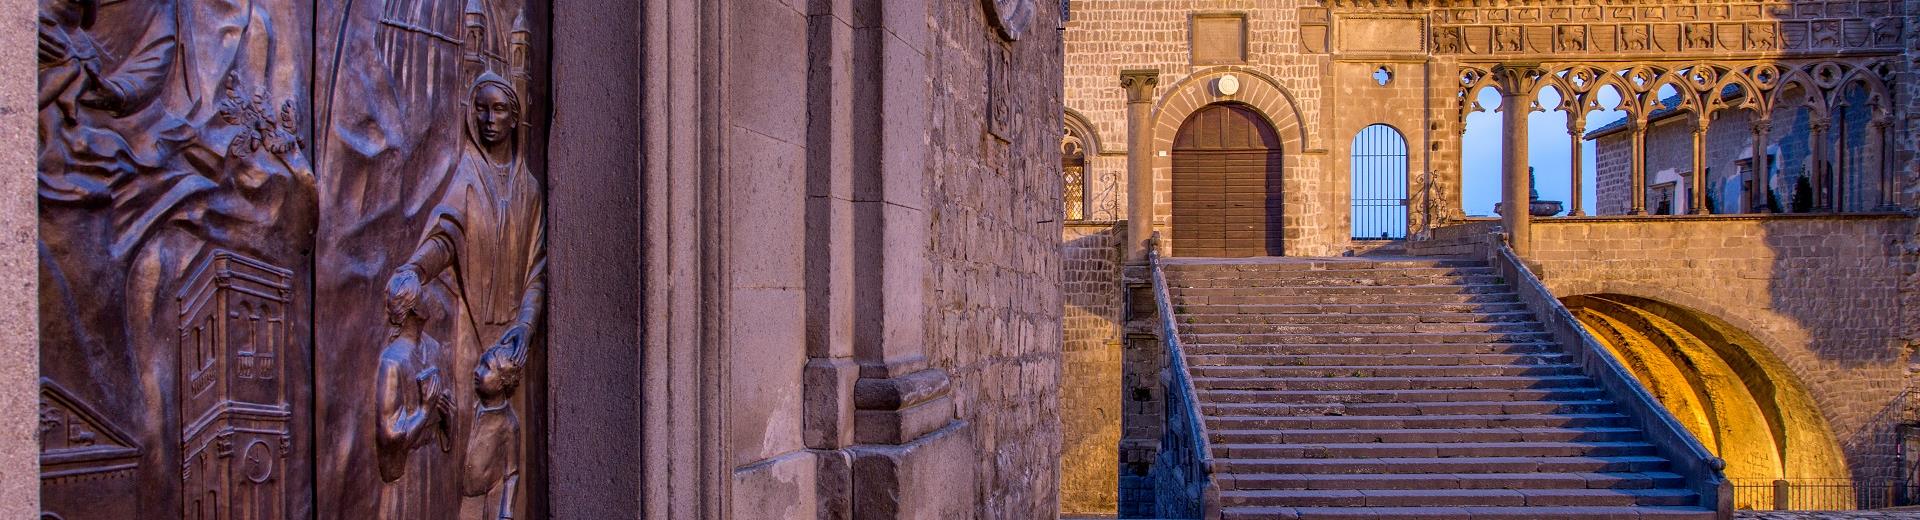 Beauty and history in Viterbo: Discover the city with the BW Hotel Viterbo